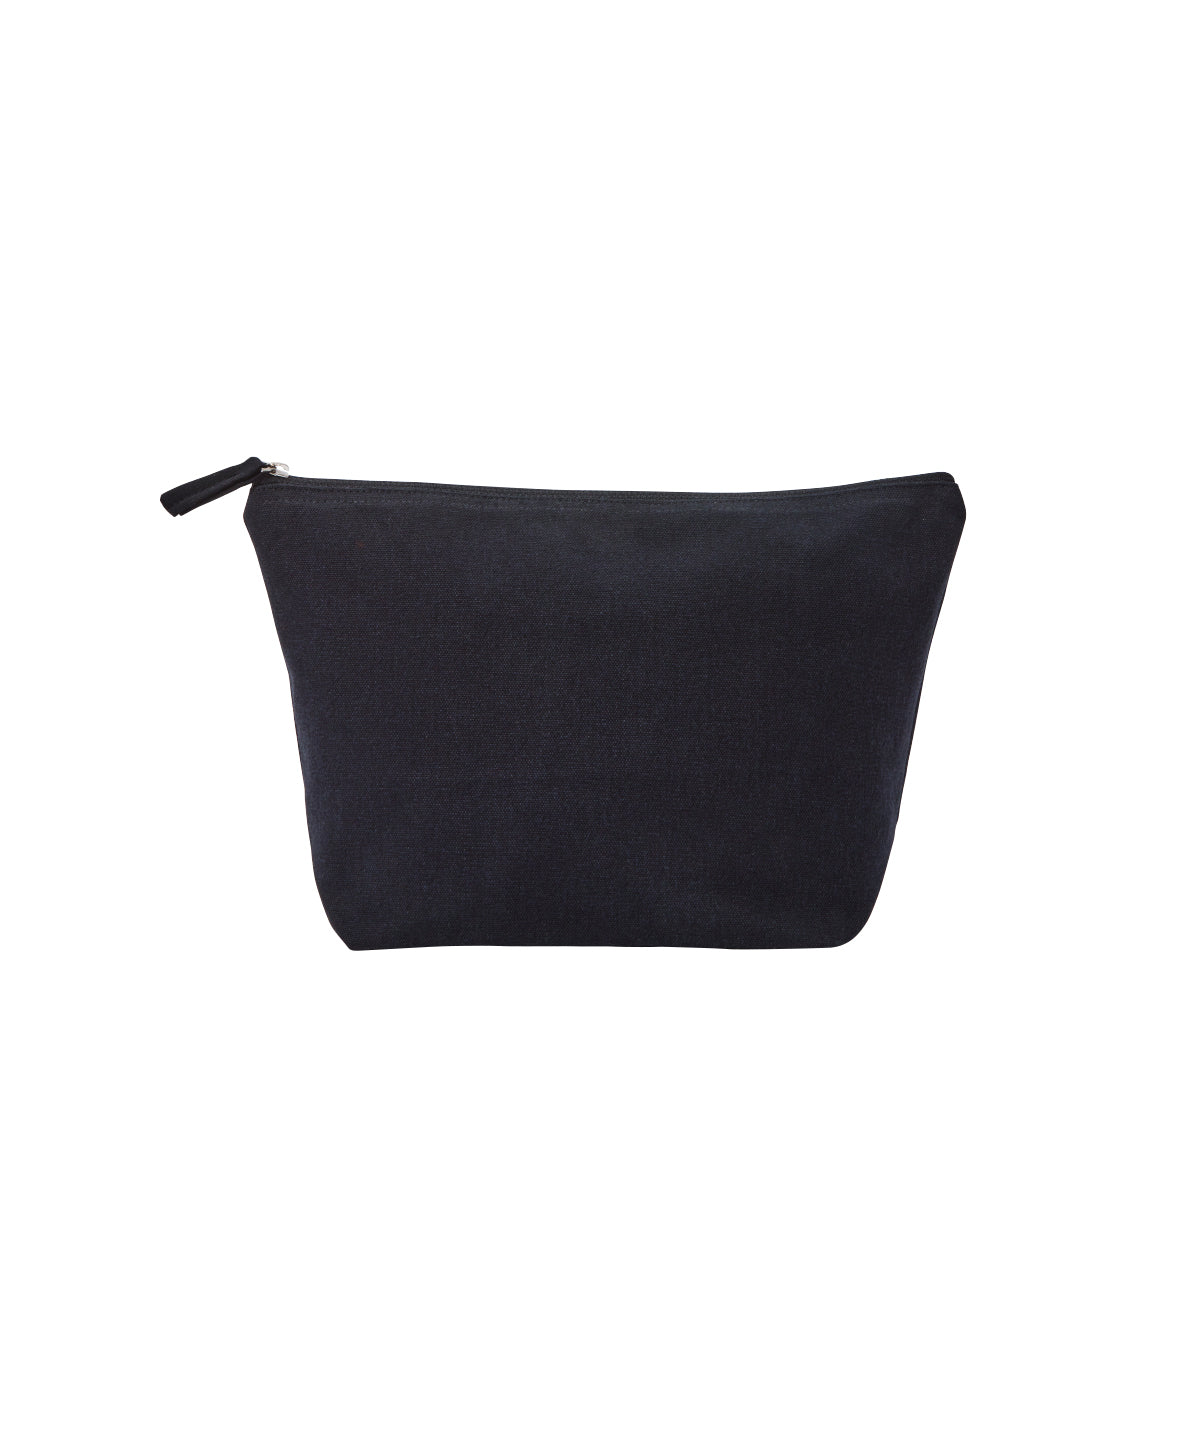 Töskur - Recycled Luxe Canvas Accessory Bag